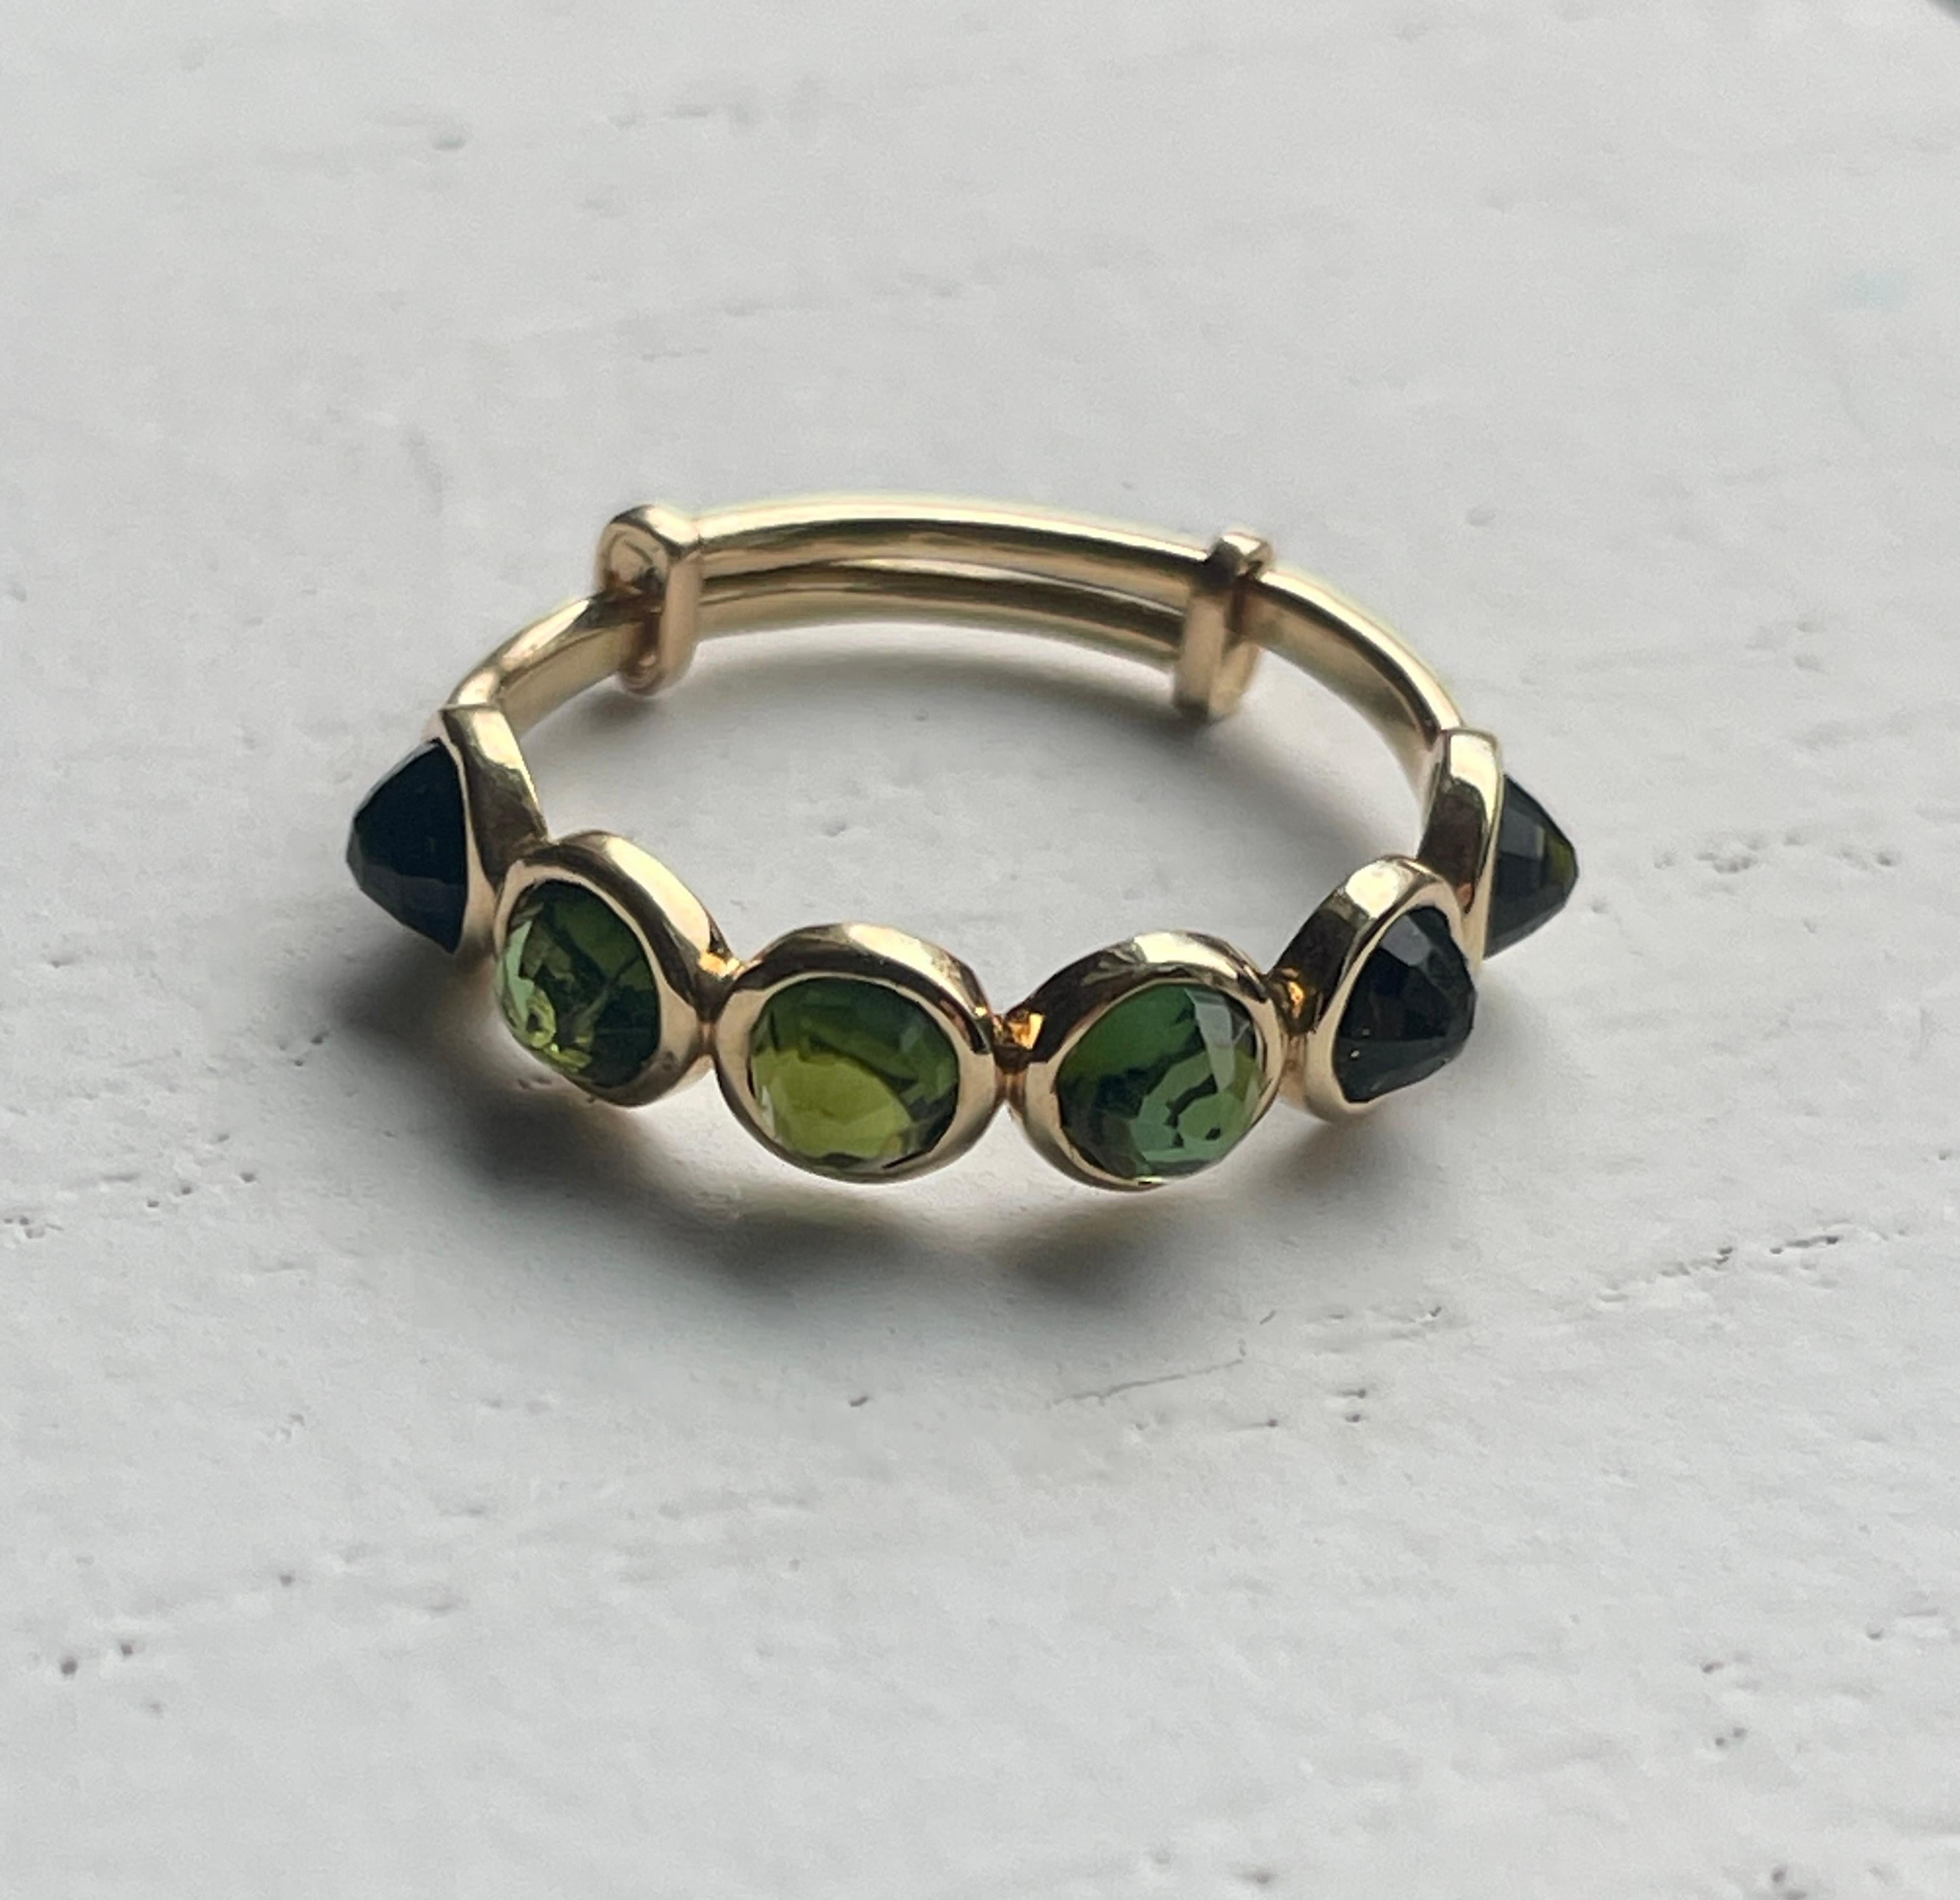 This ring is comprised of 6 round checker cut hunter green Tourmaline gemstones. Set in a 18K Gold bezel setting, these stones are set upside down allowing for the point of the stone to sit at the top of the ring allowing for maximum sparkle and